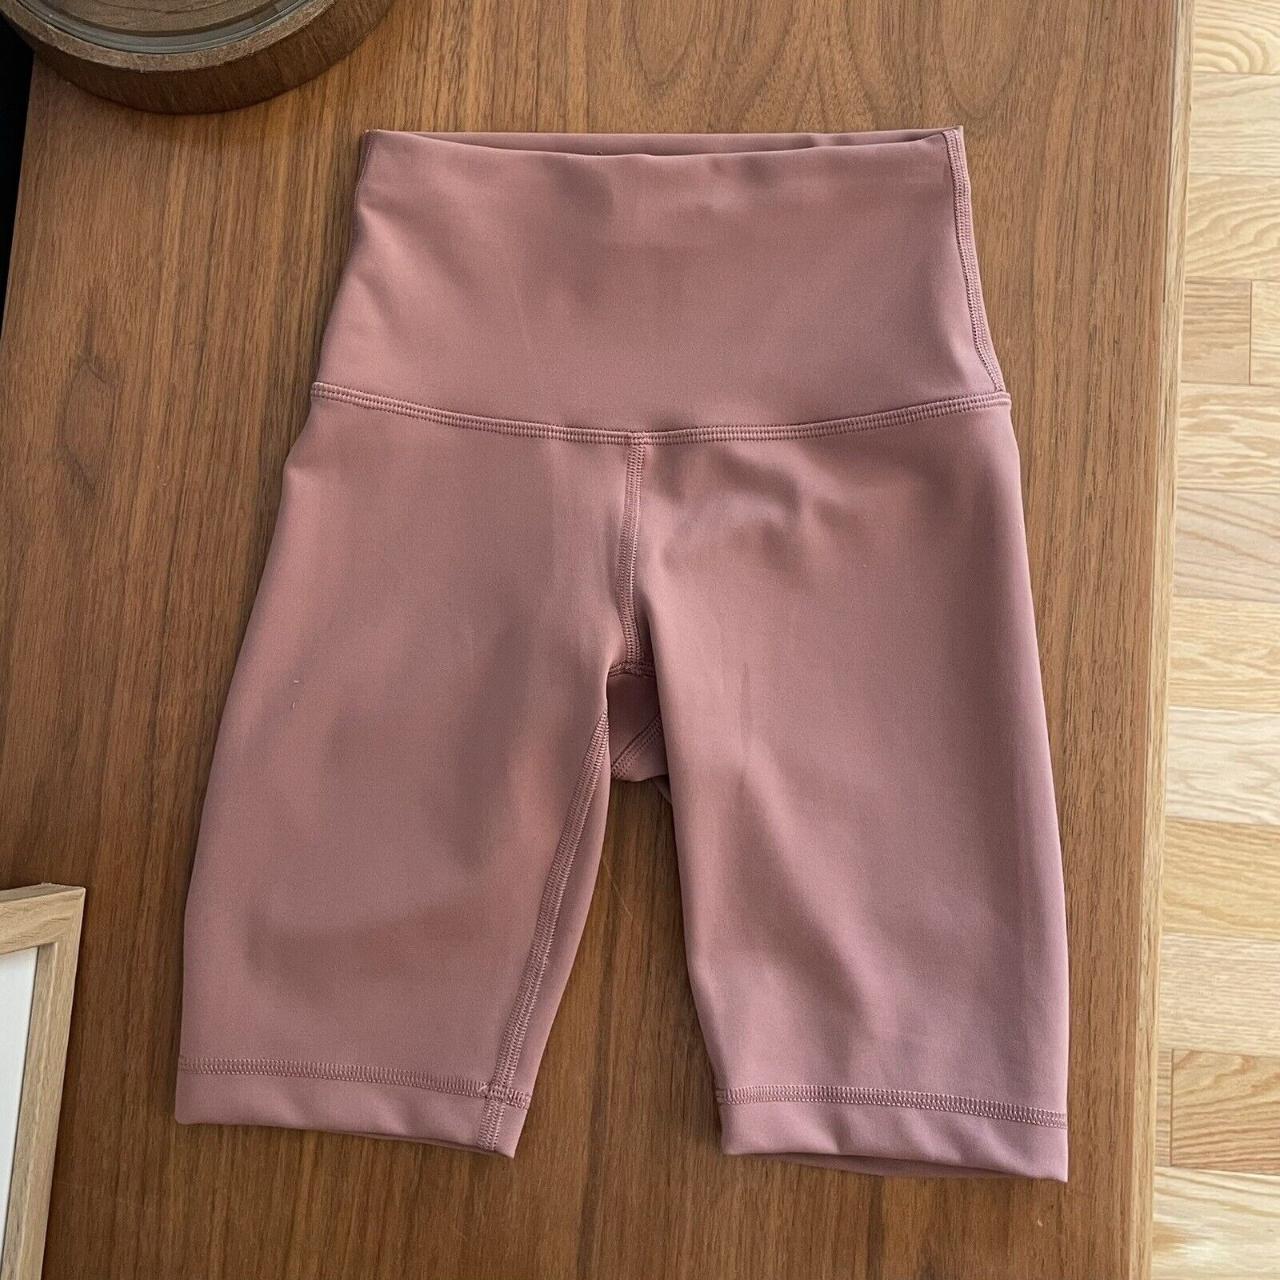 Lululemon Align High Rise Short with Pockets 8 - Spiced Chai